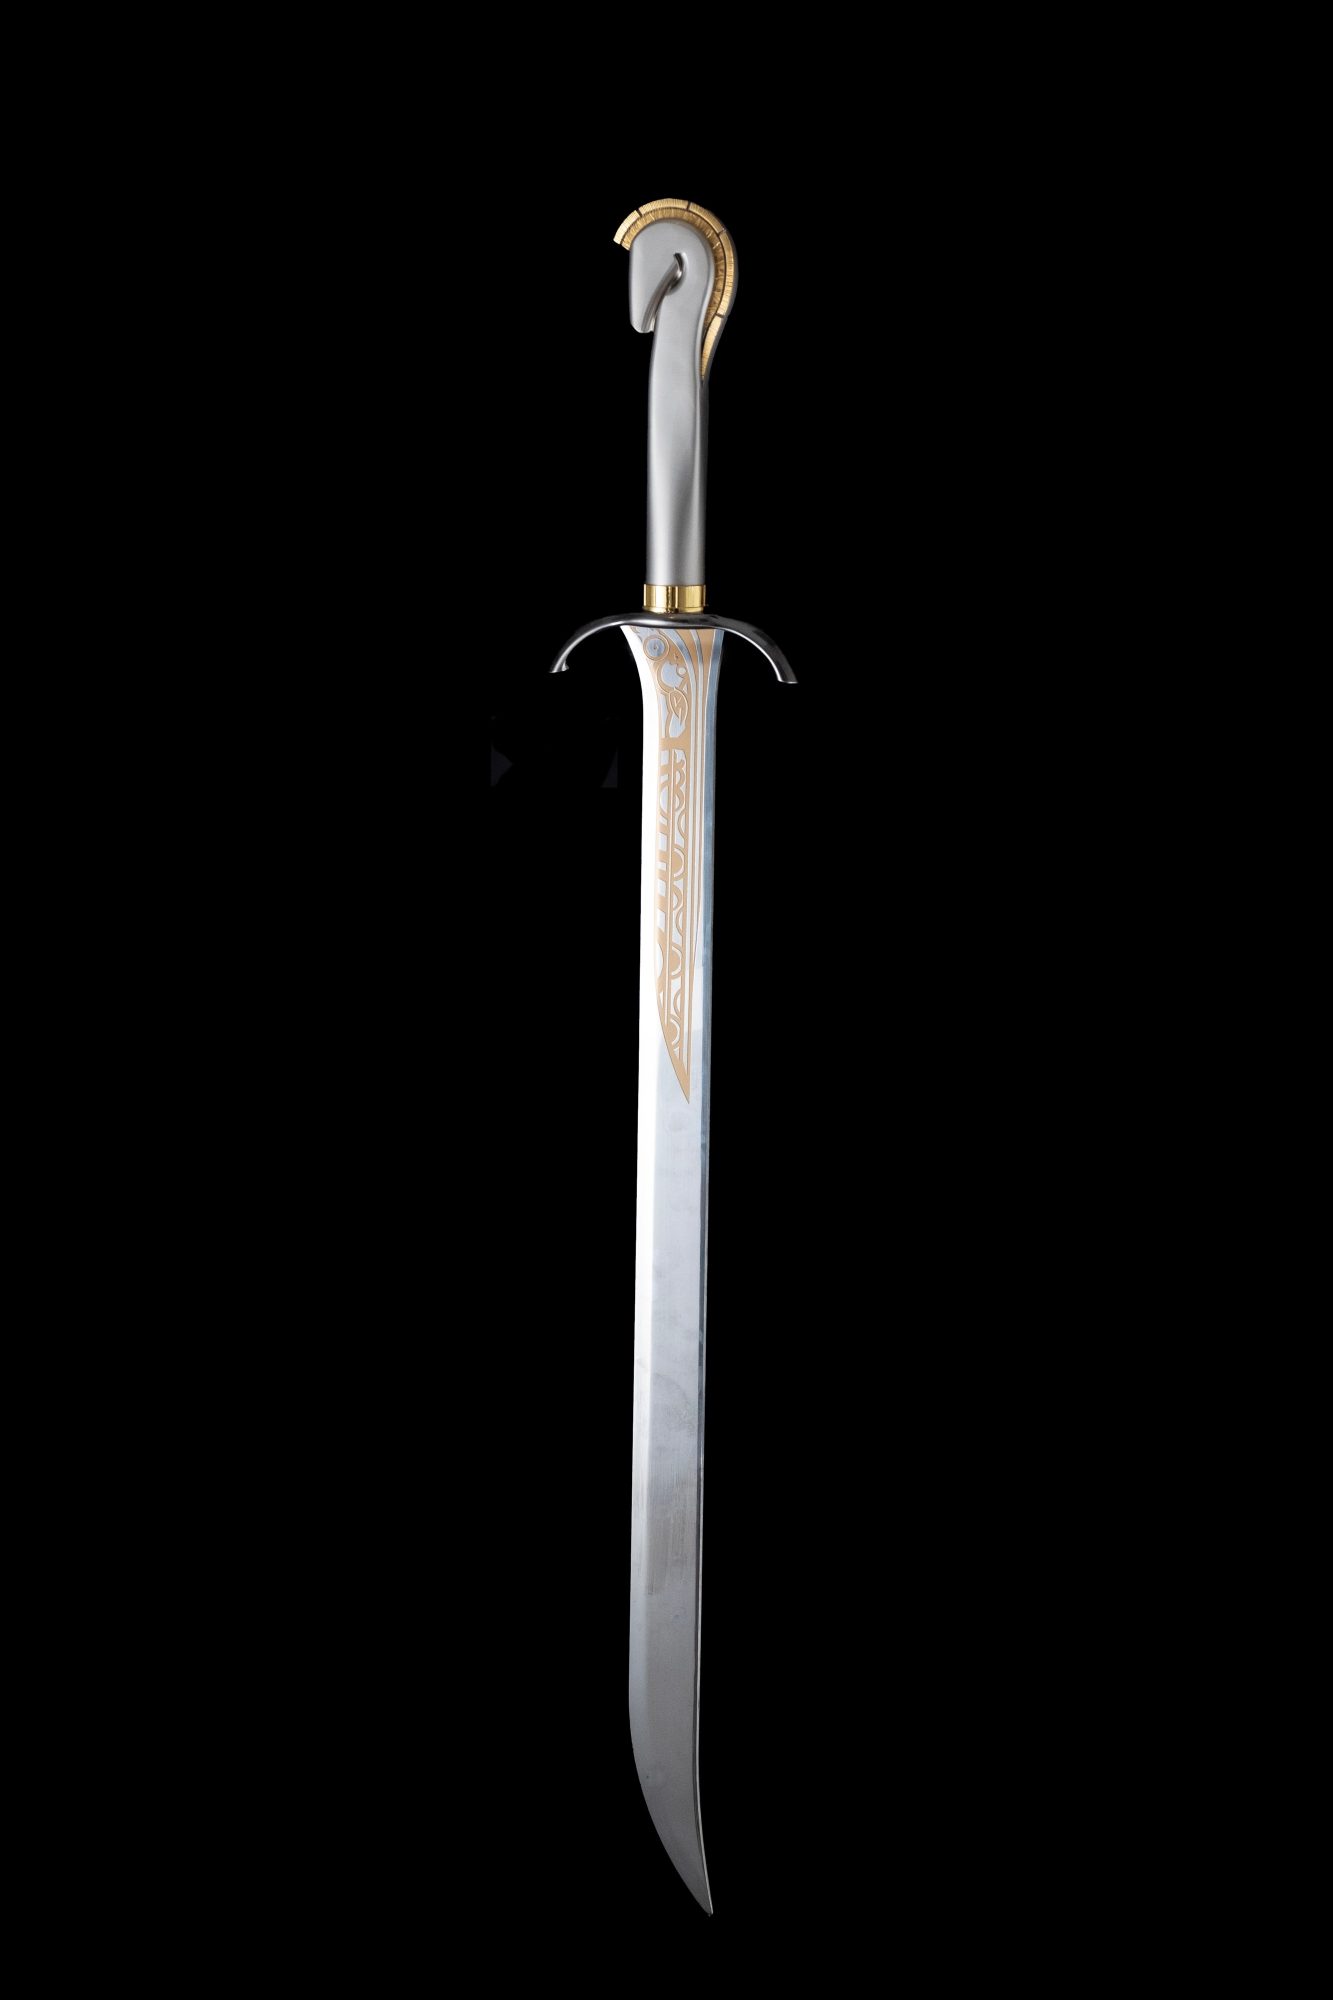 medieval weapons names and pictures